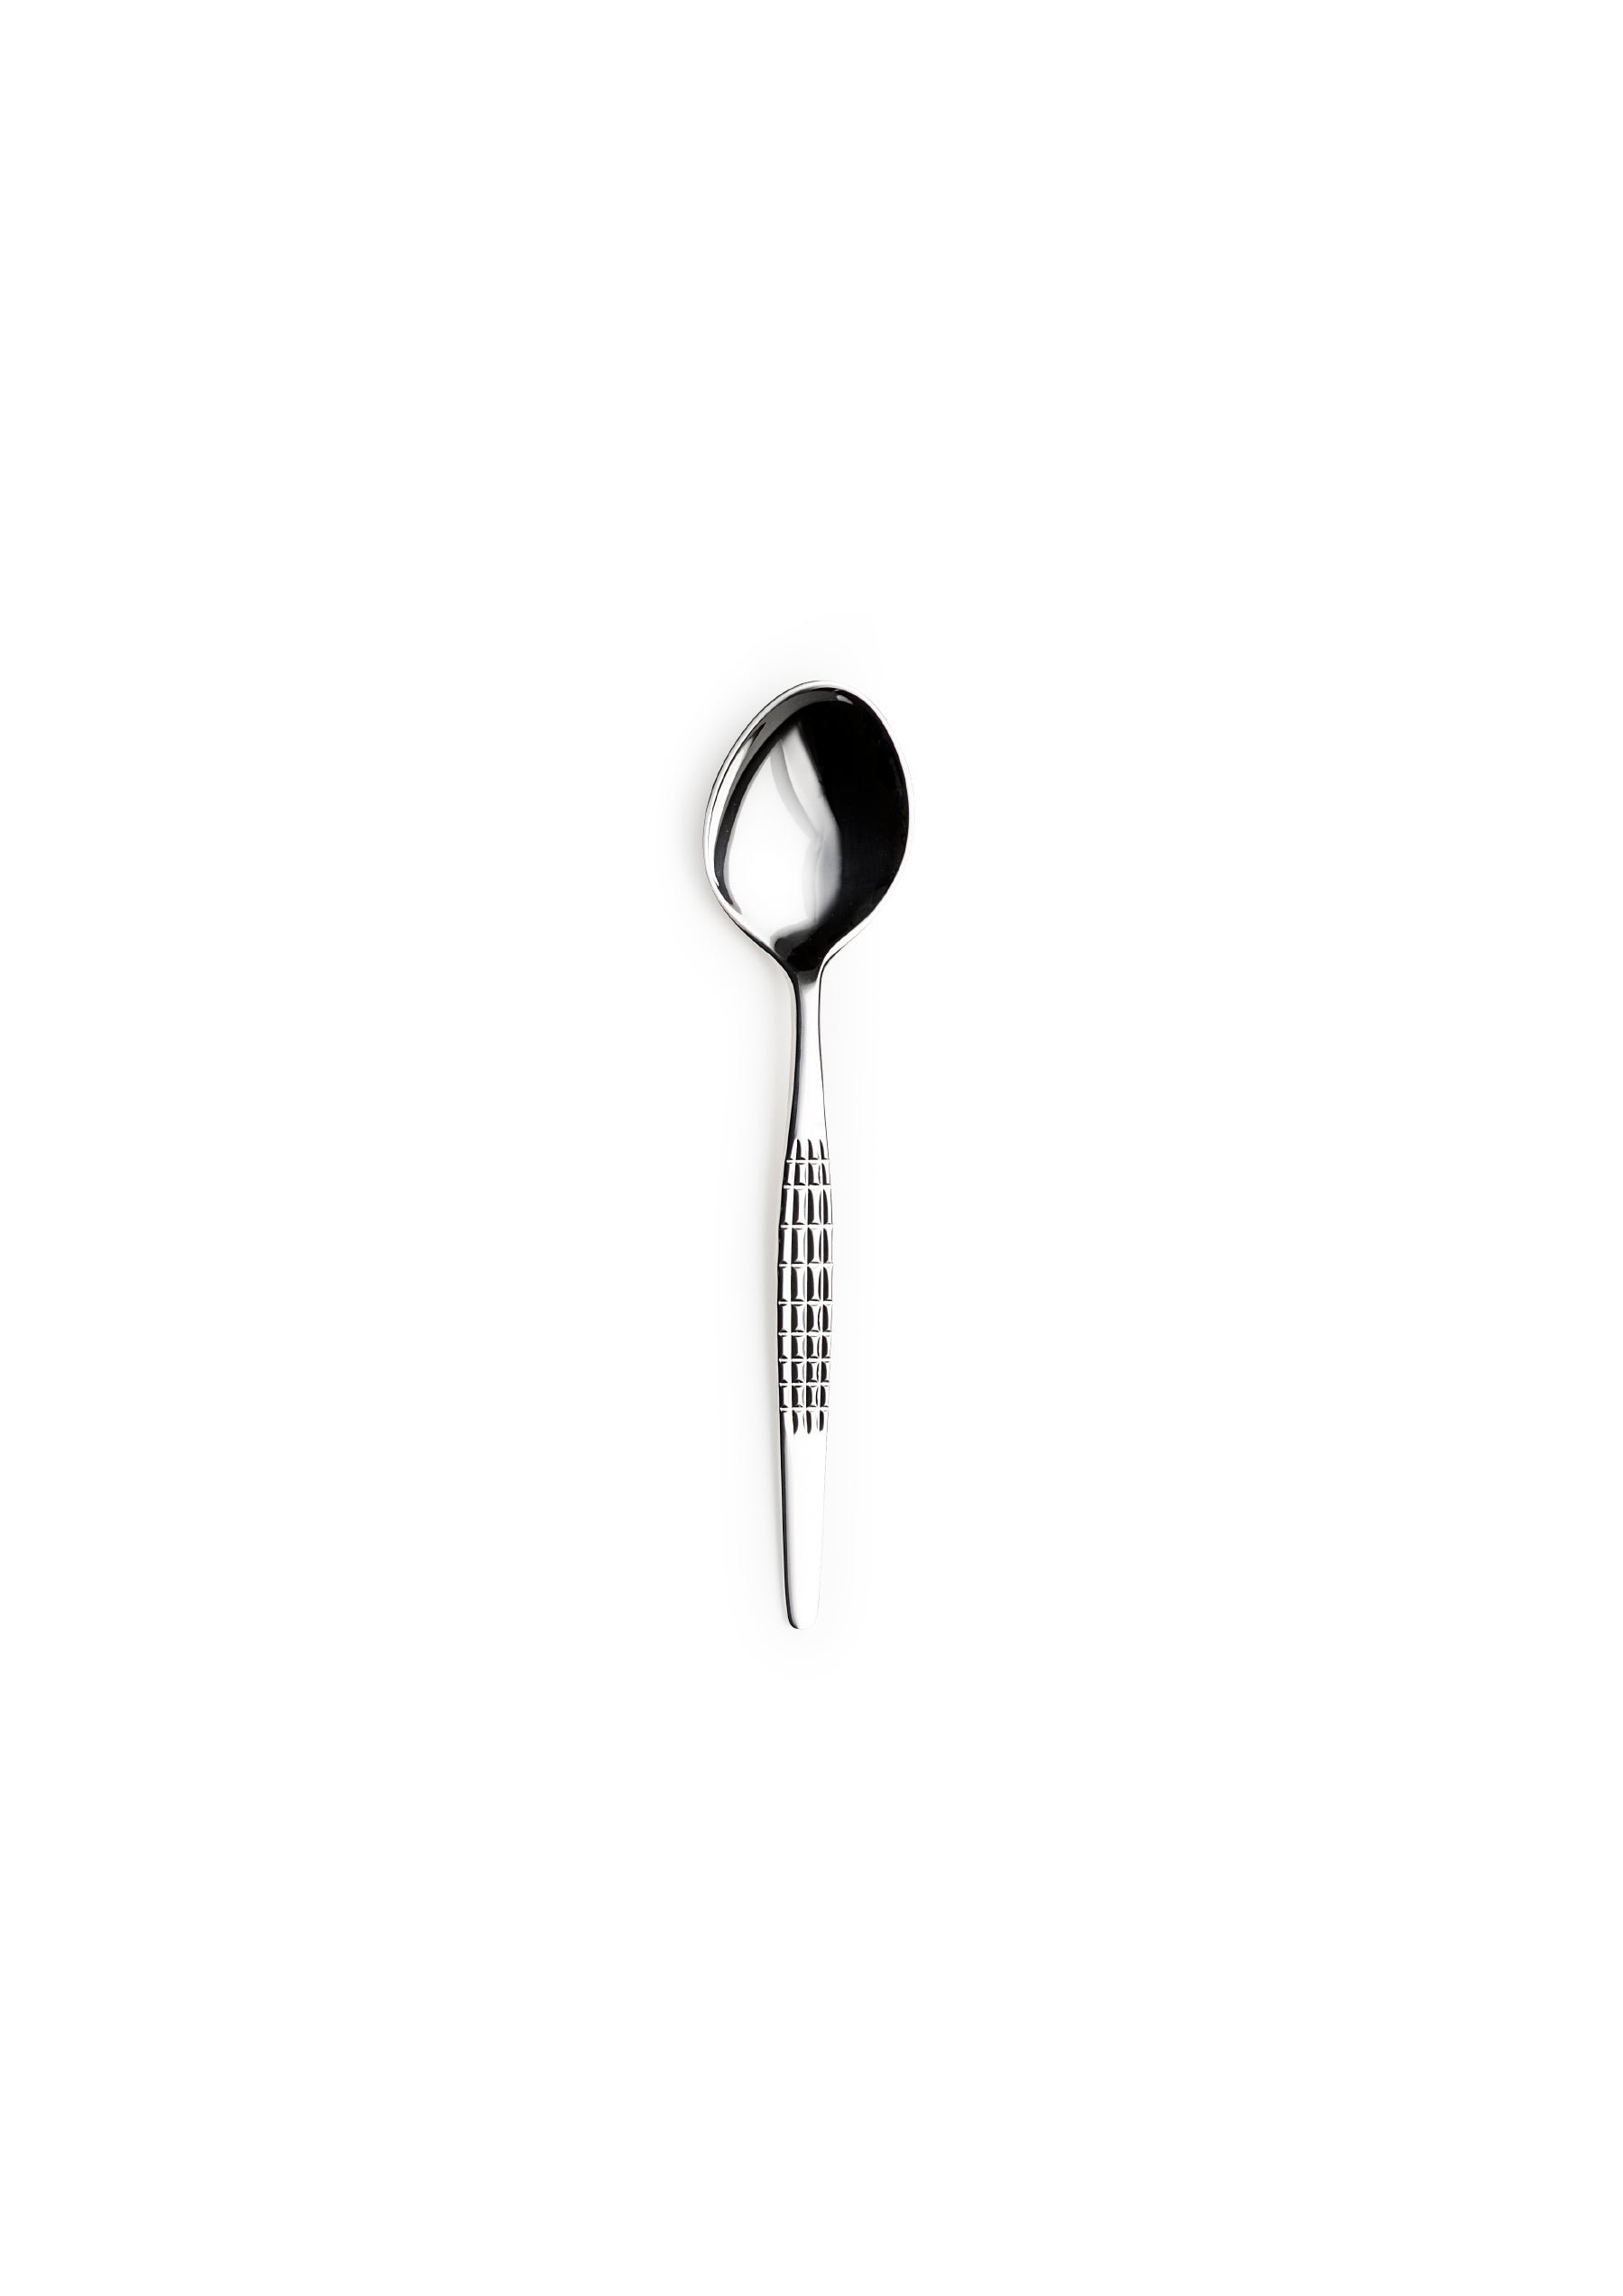 Faceted coffee spoon